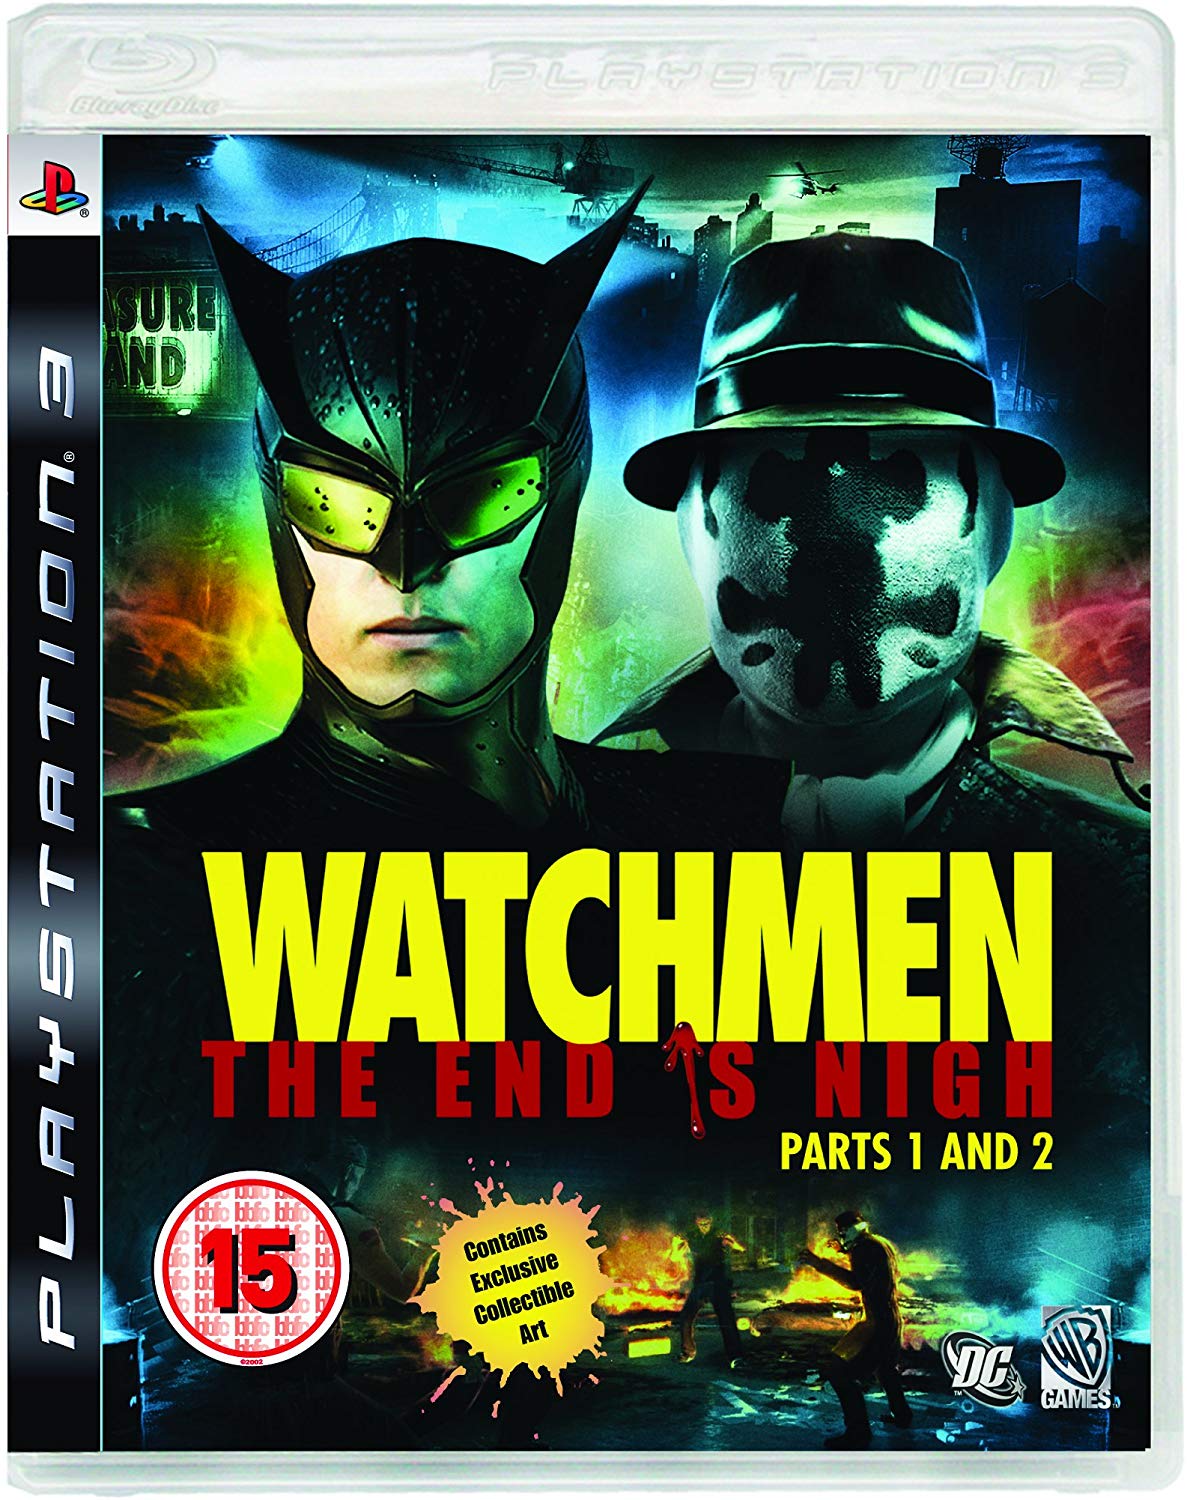 Watchmen The End Is Nigh (Parts 1 and 2) - PlayStation 3 Játékok